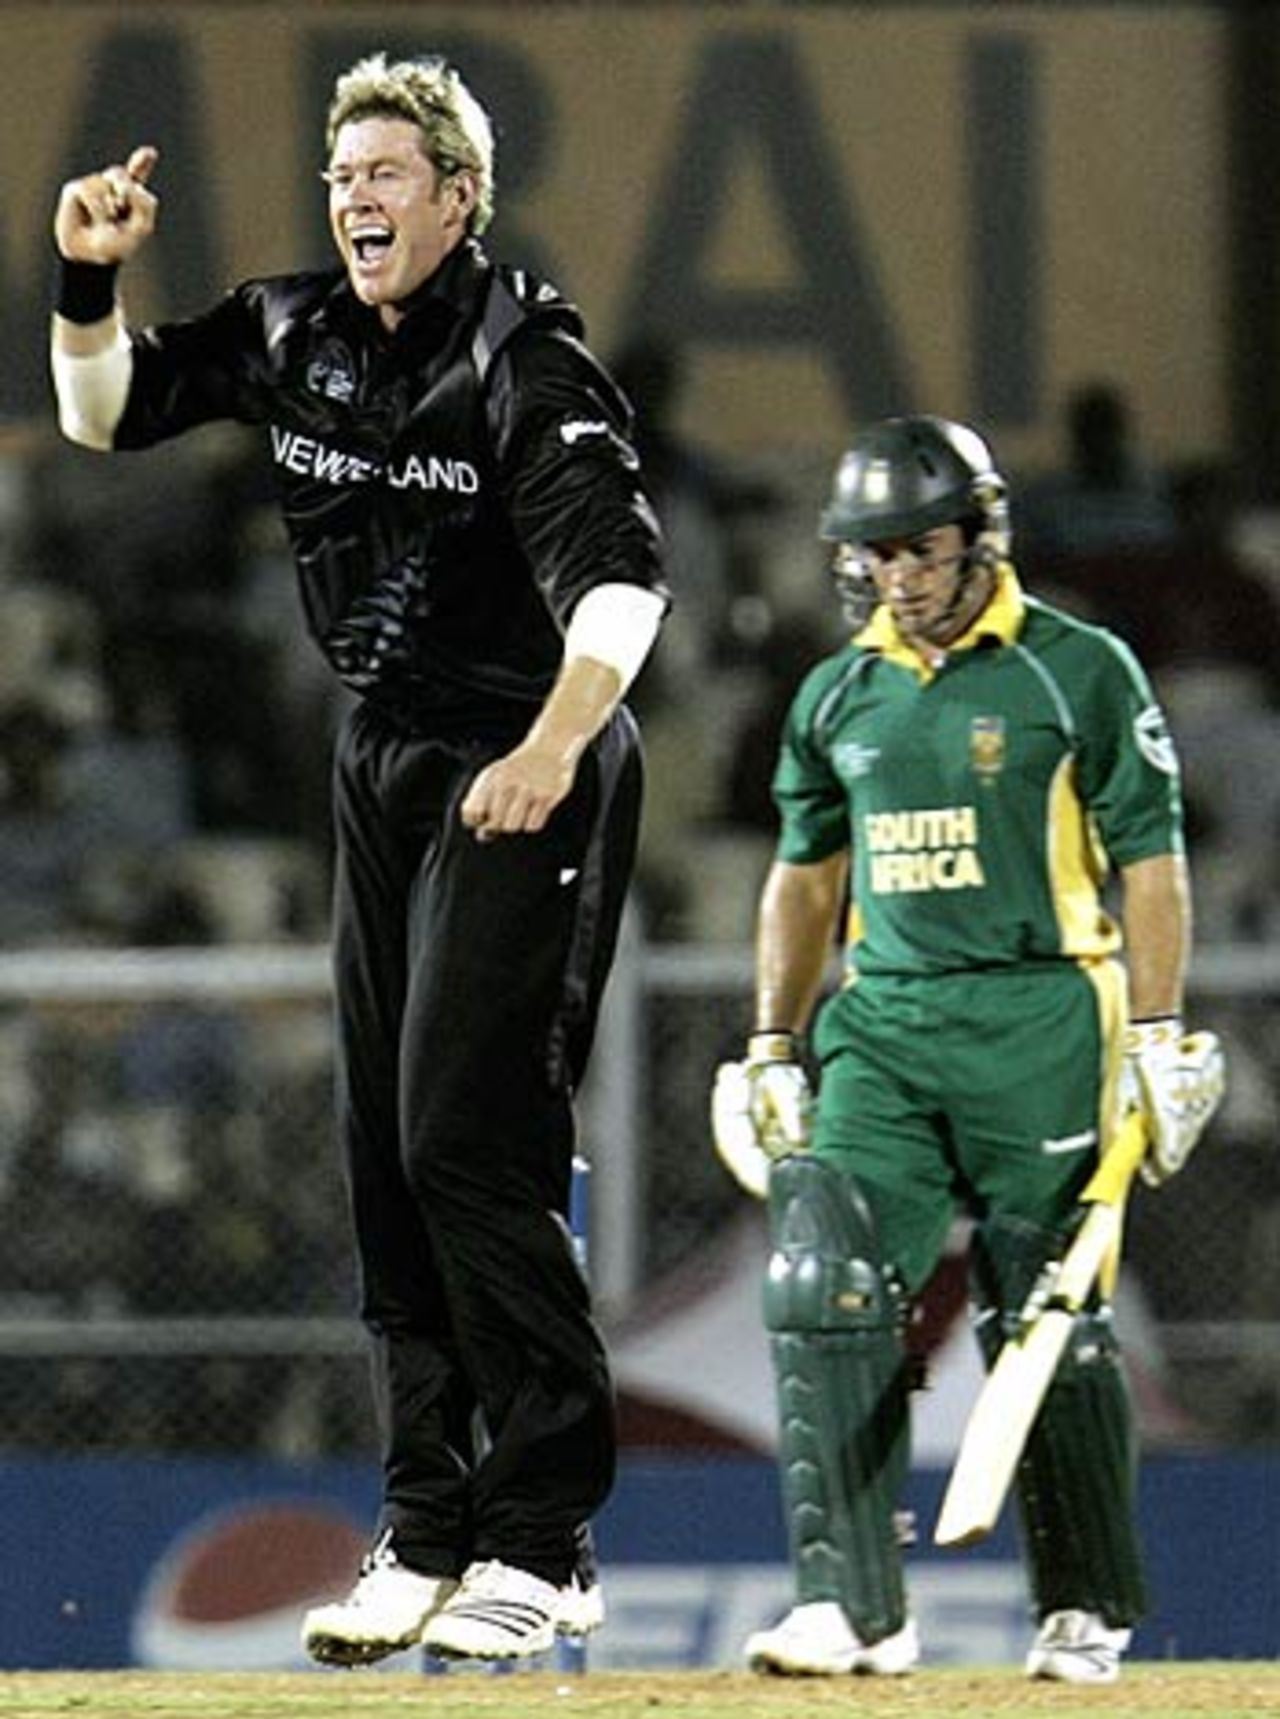 Jacob Oram wins the appeal in his favour as Mark Boucher walks back, New Zealand v South Africa, 2nd Match, Champions Trophy, Mumbai, October 16, 2006